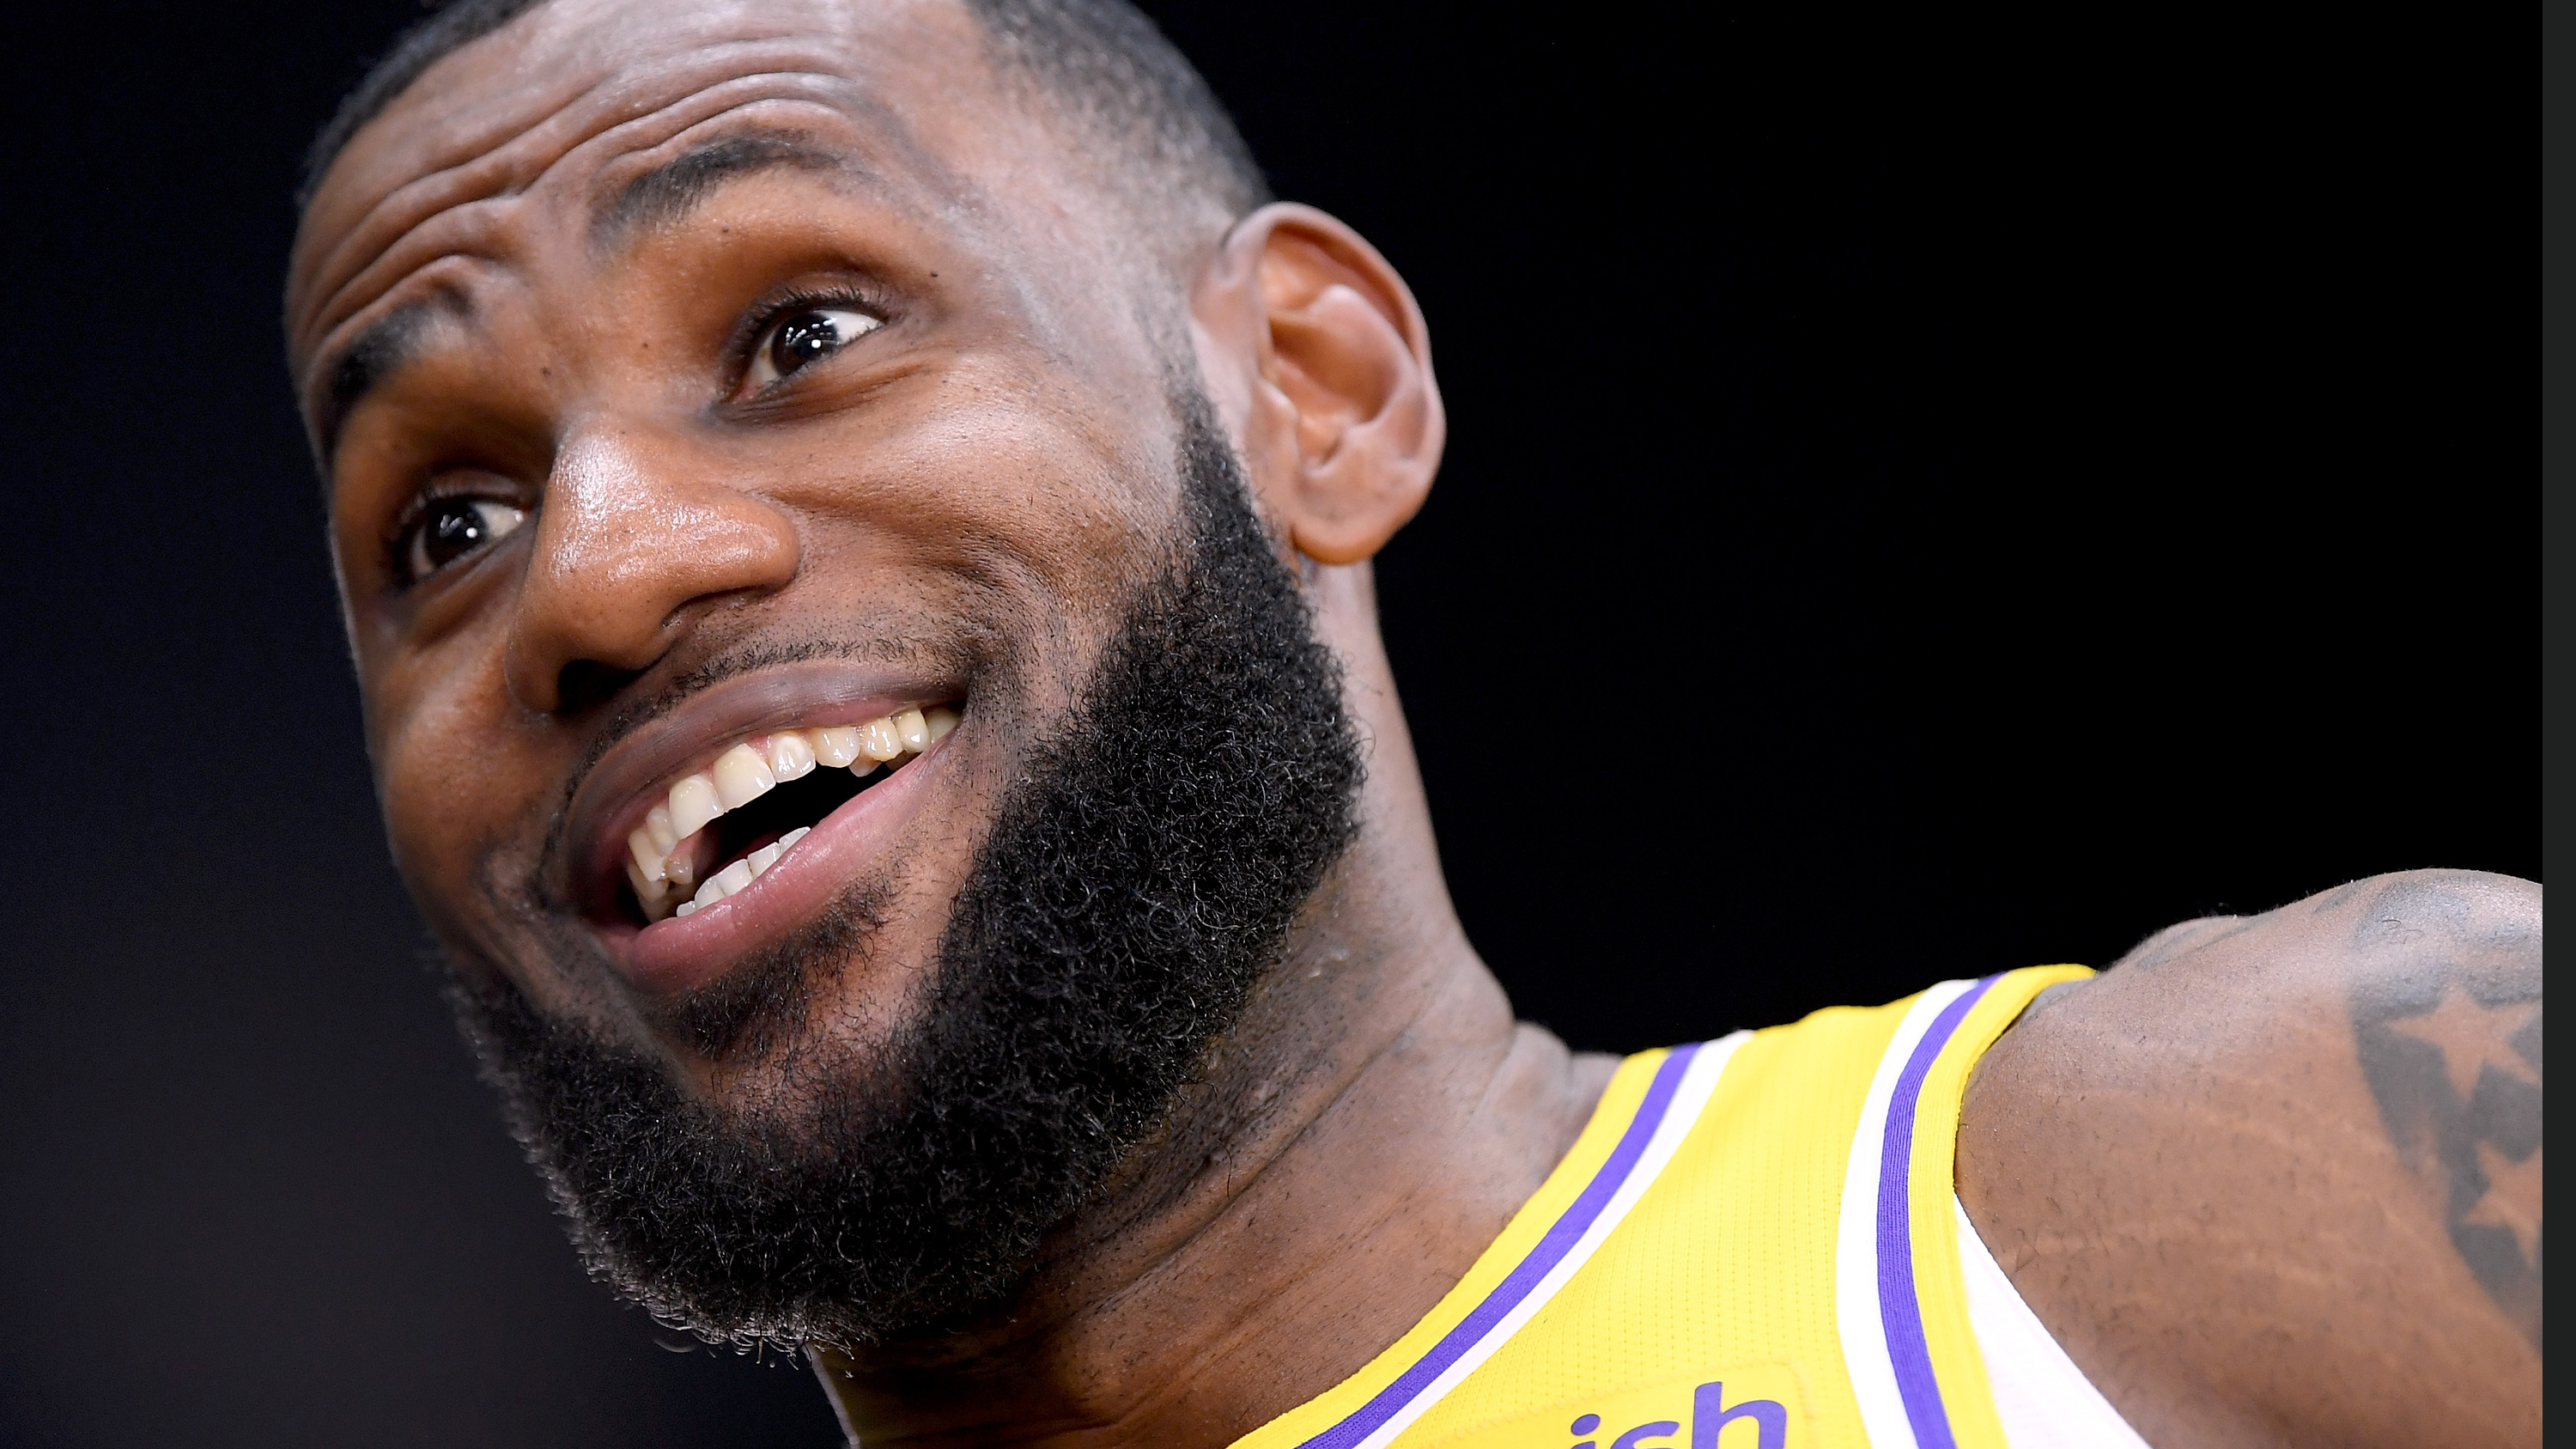 LeBron James' Lakers Shorts Cost $500 And Are Predictably Sold Out